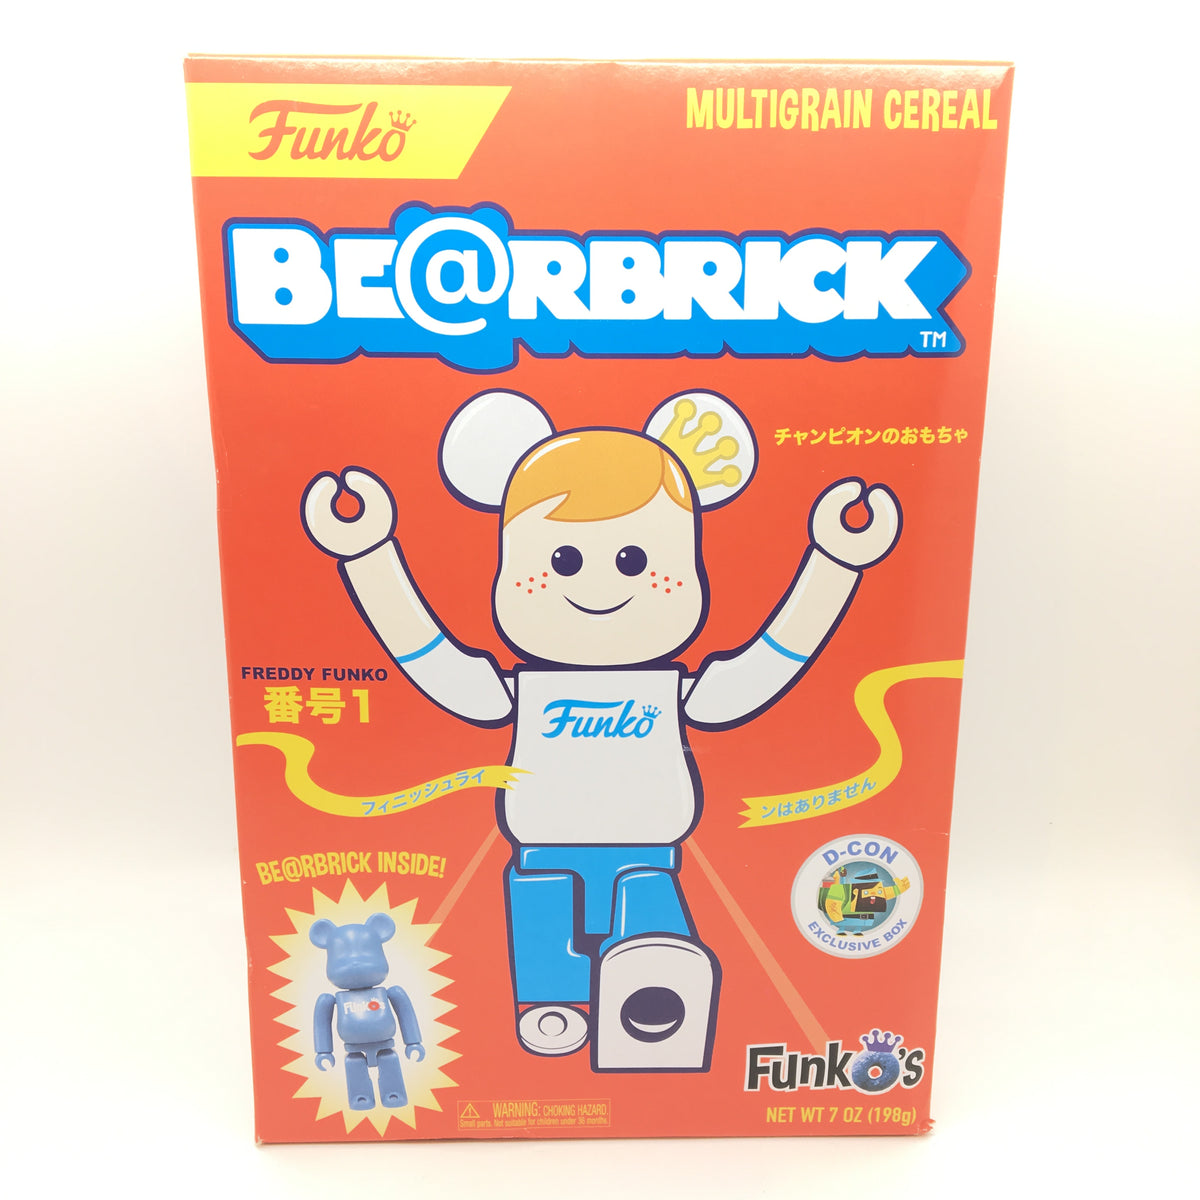 Bearbrick Funko&#39;s Cereal with 100% Bearbrick Figure Designer Con ( DCON ) Exclusive - Red Box